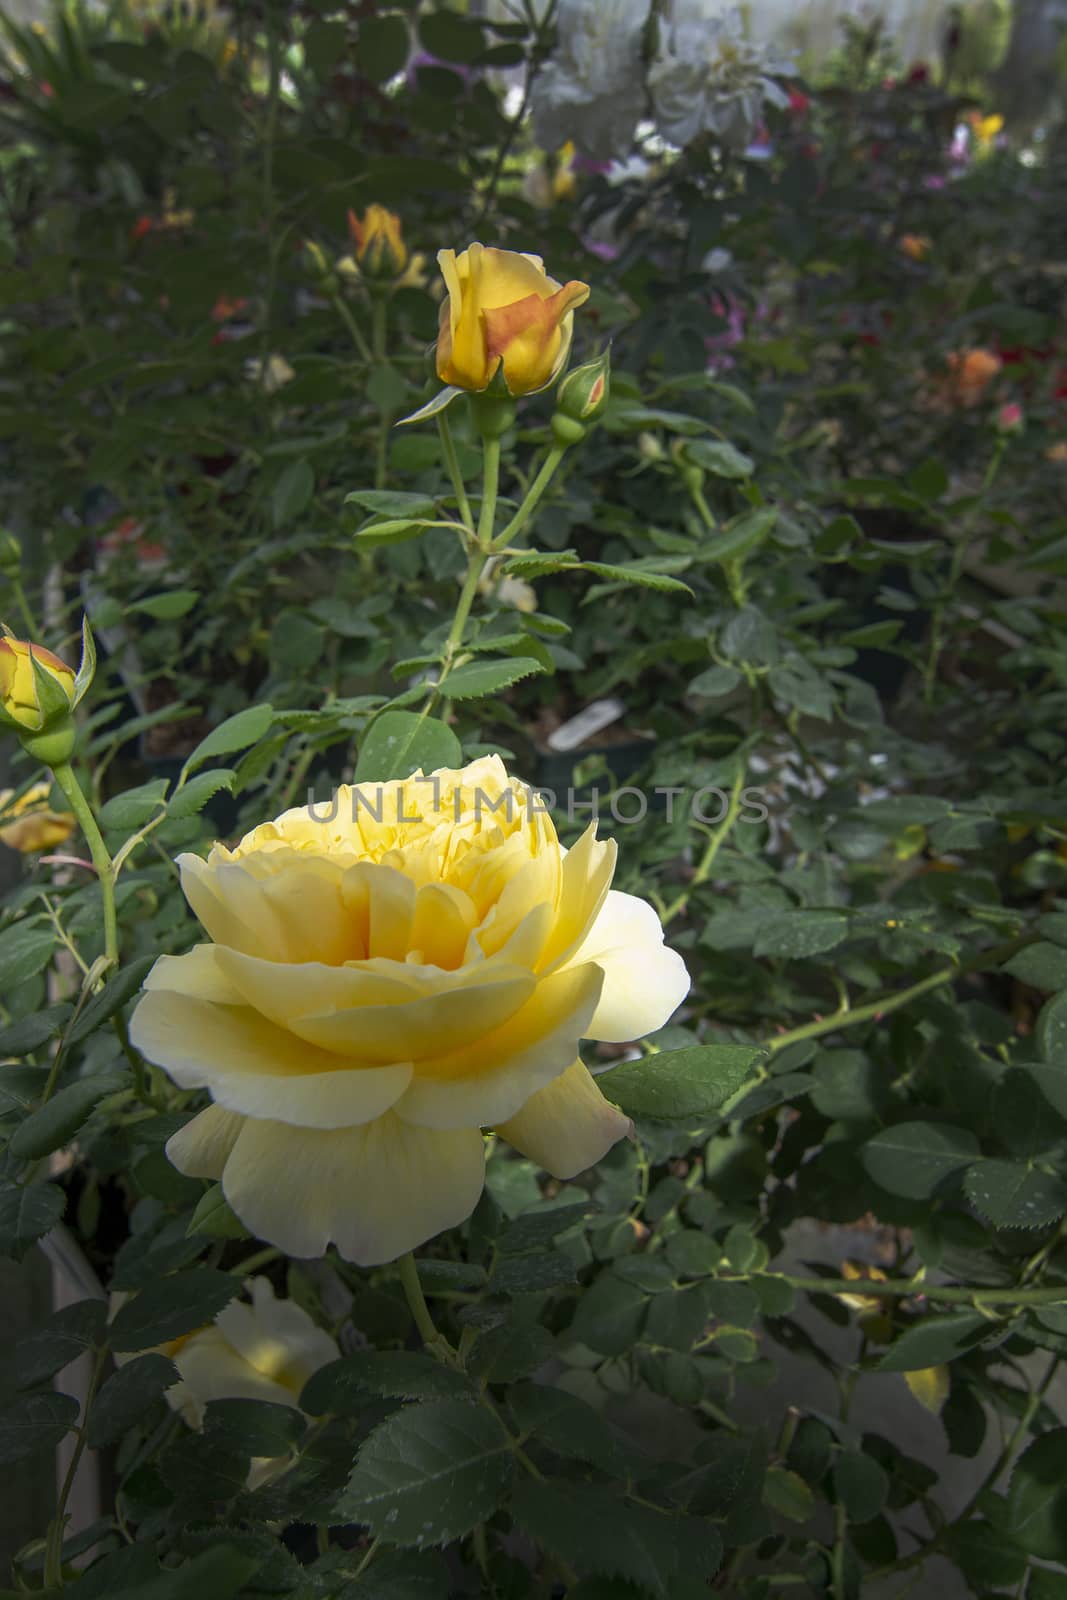 Gorgeous double yellow rose flowers by ArtesiaWells